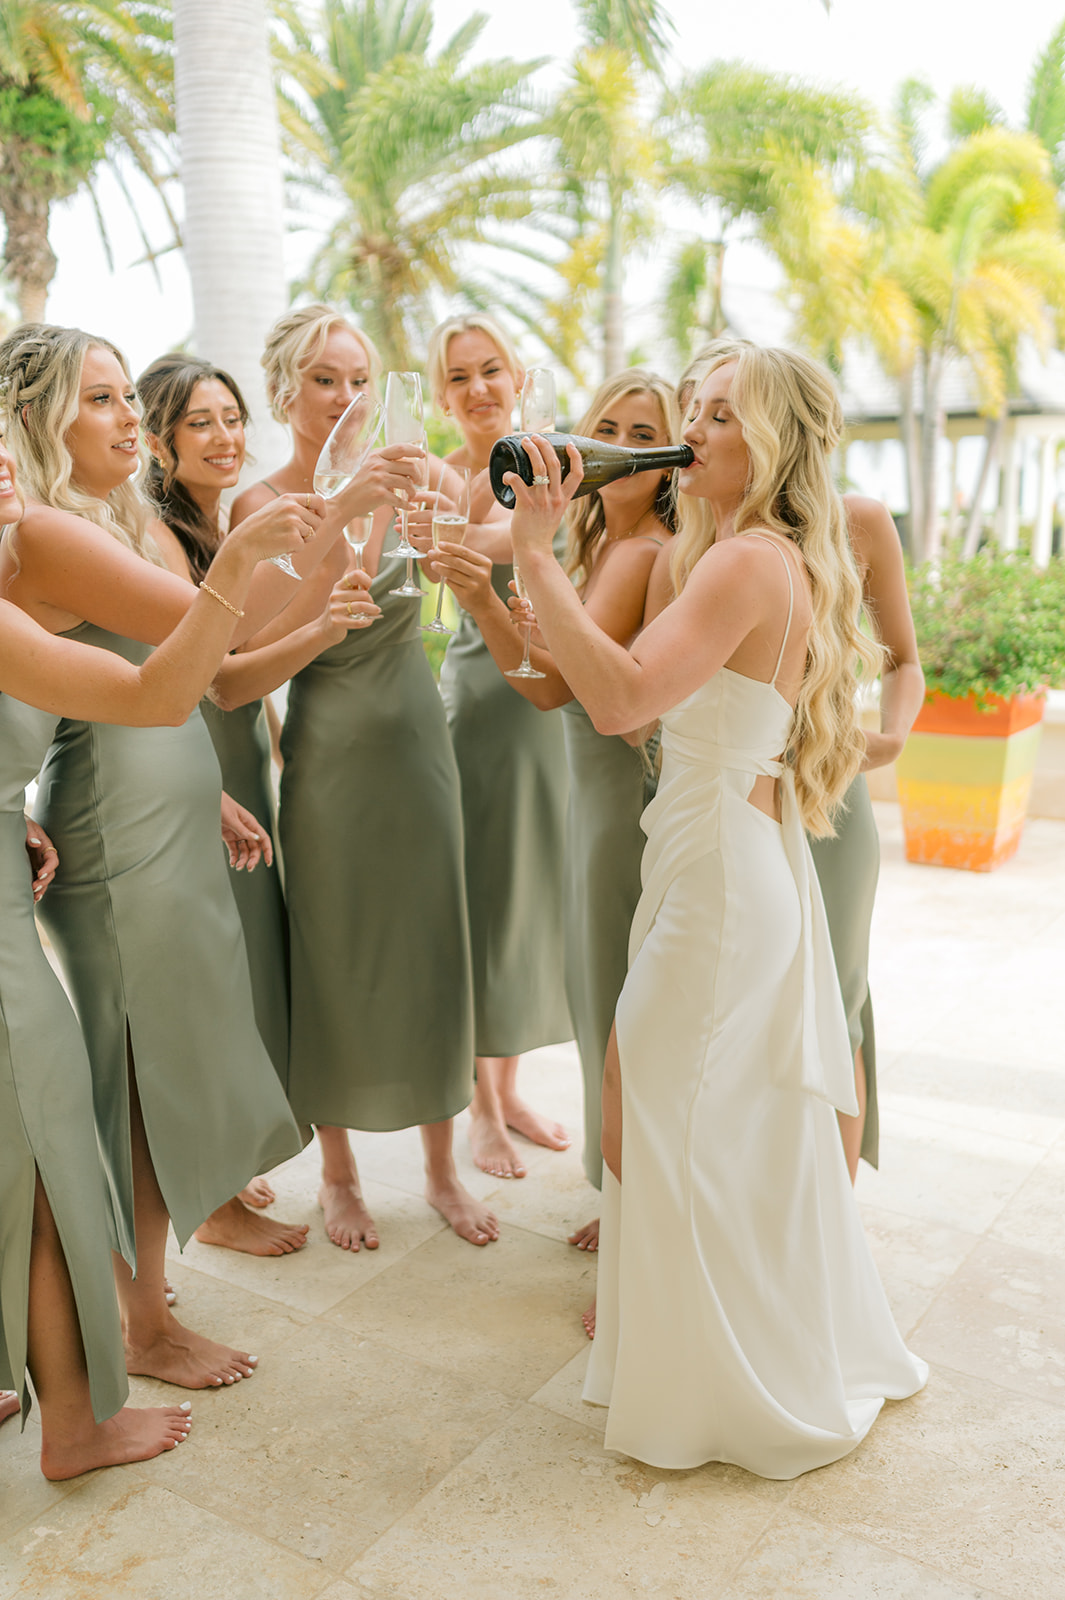 "Candid Ceremony Shots at a Luxurious Antigua Wedding"
